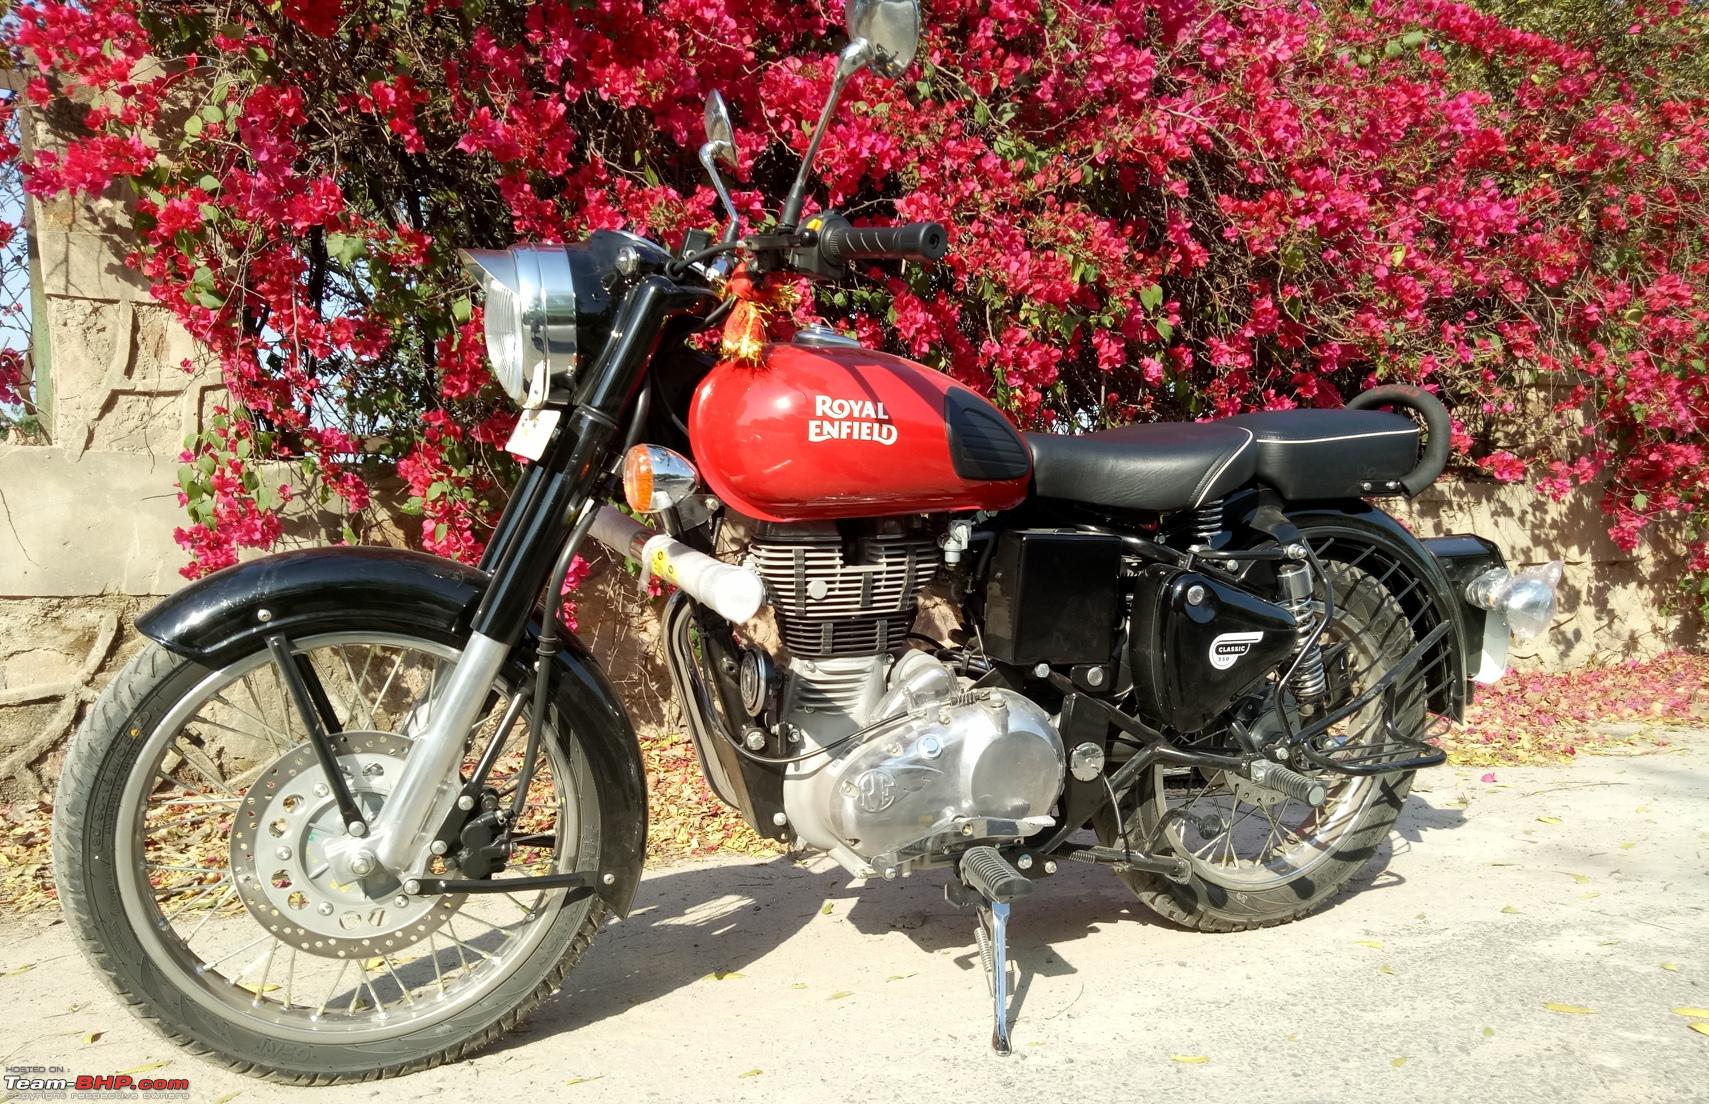 All T BHP Royal Enfield Owners Your Bike Pics Here Please